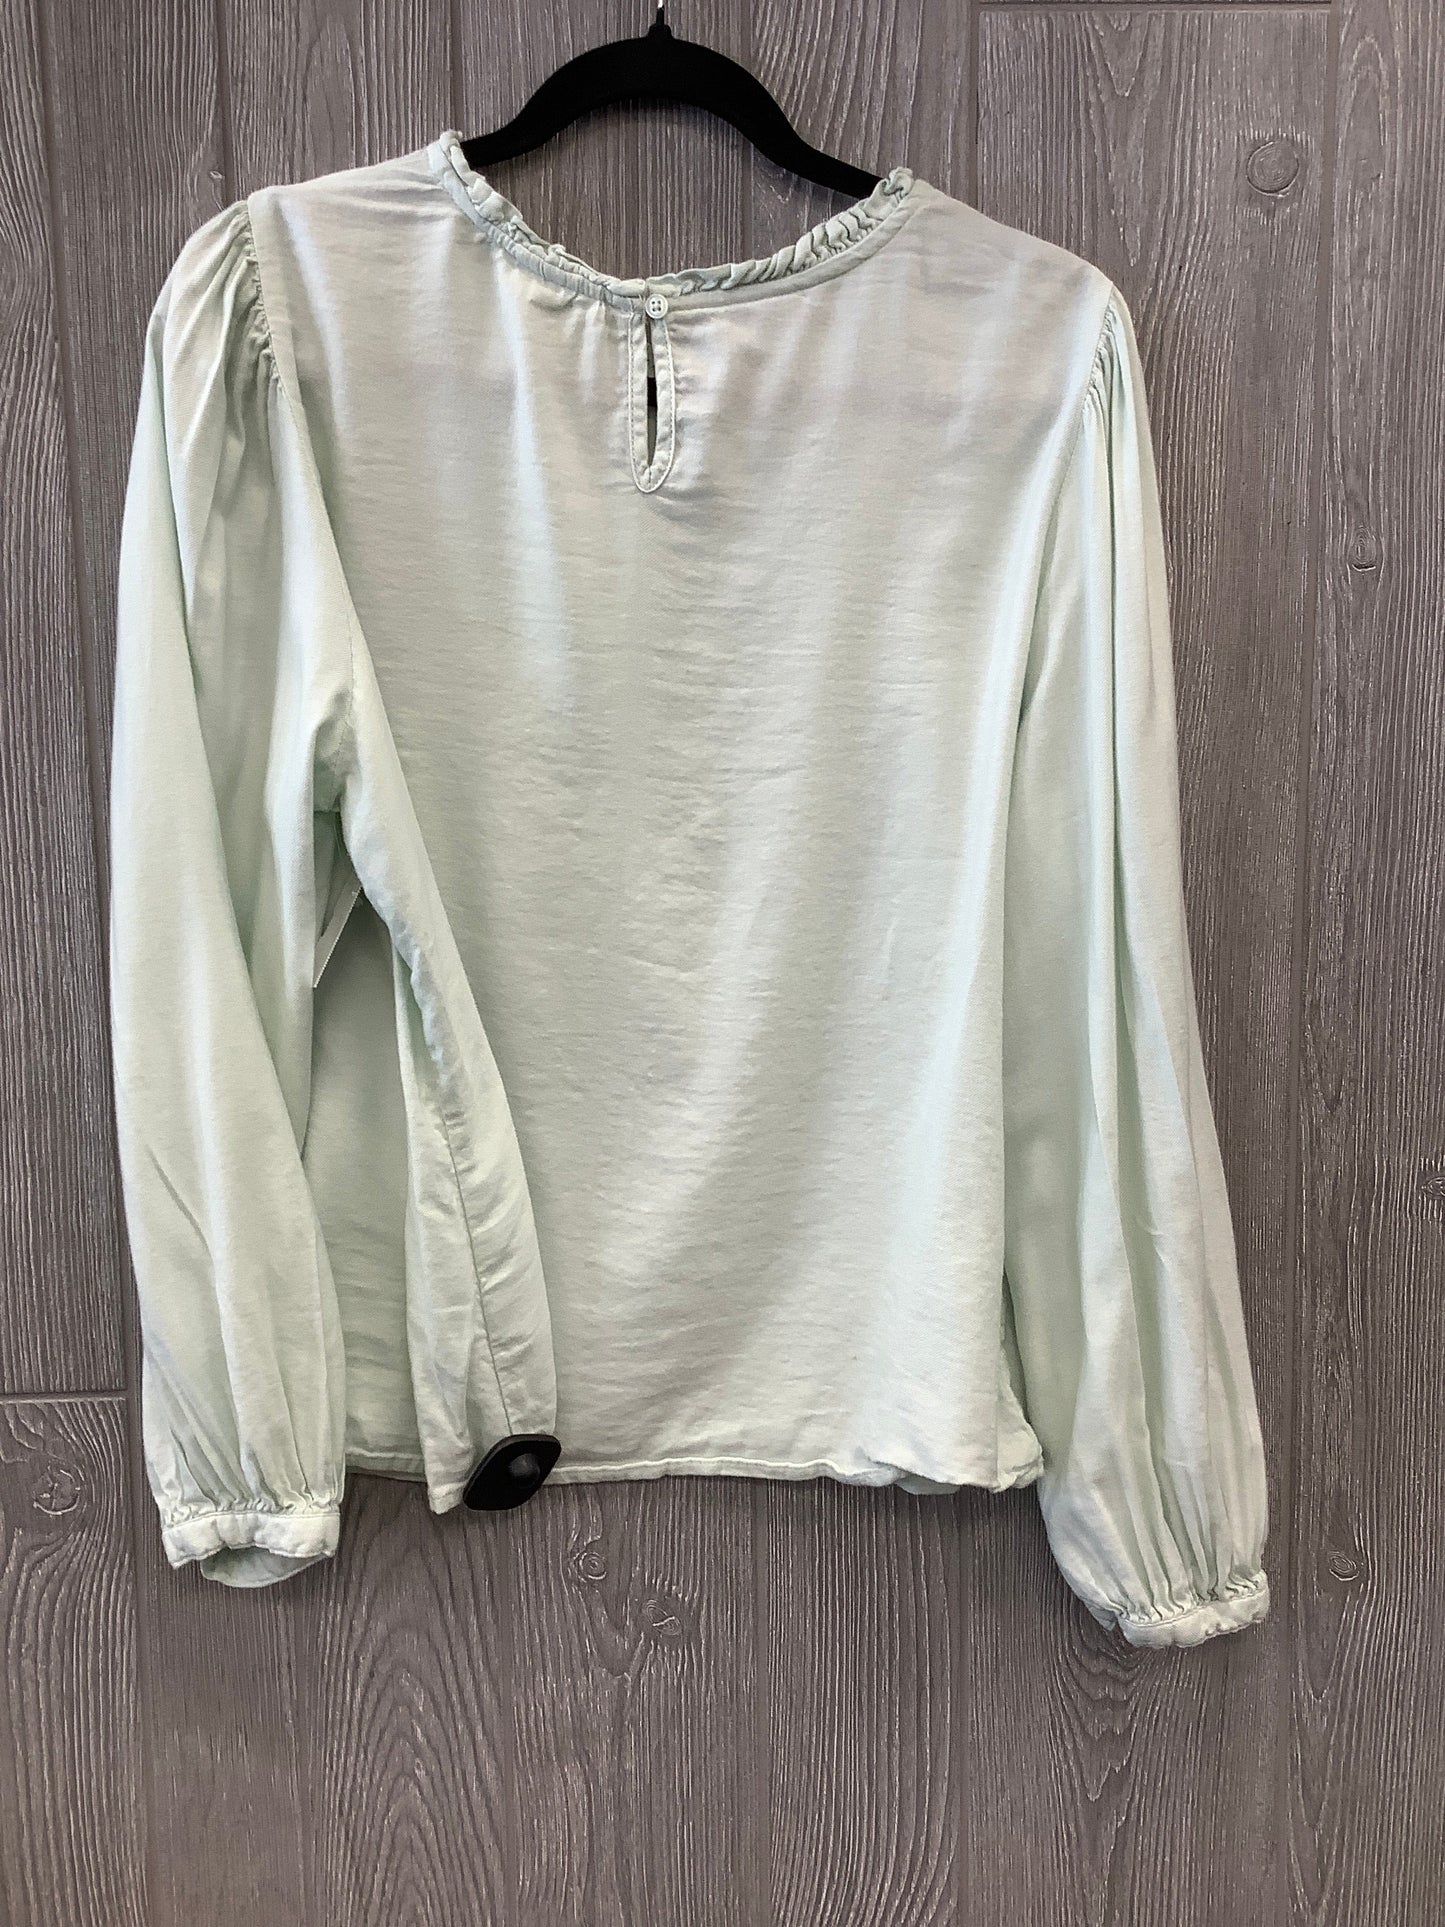 Green Top Long Sleeve Ana, Size L